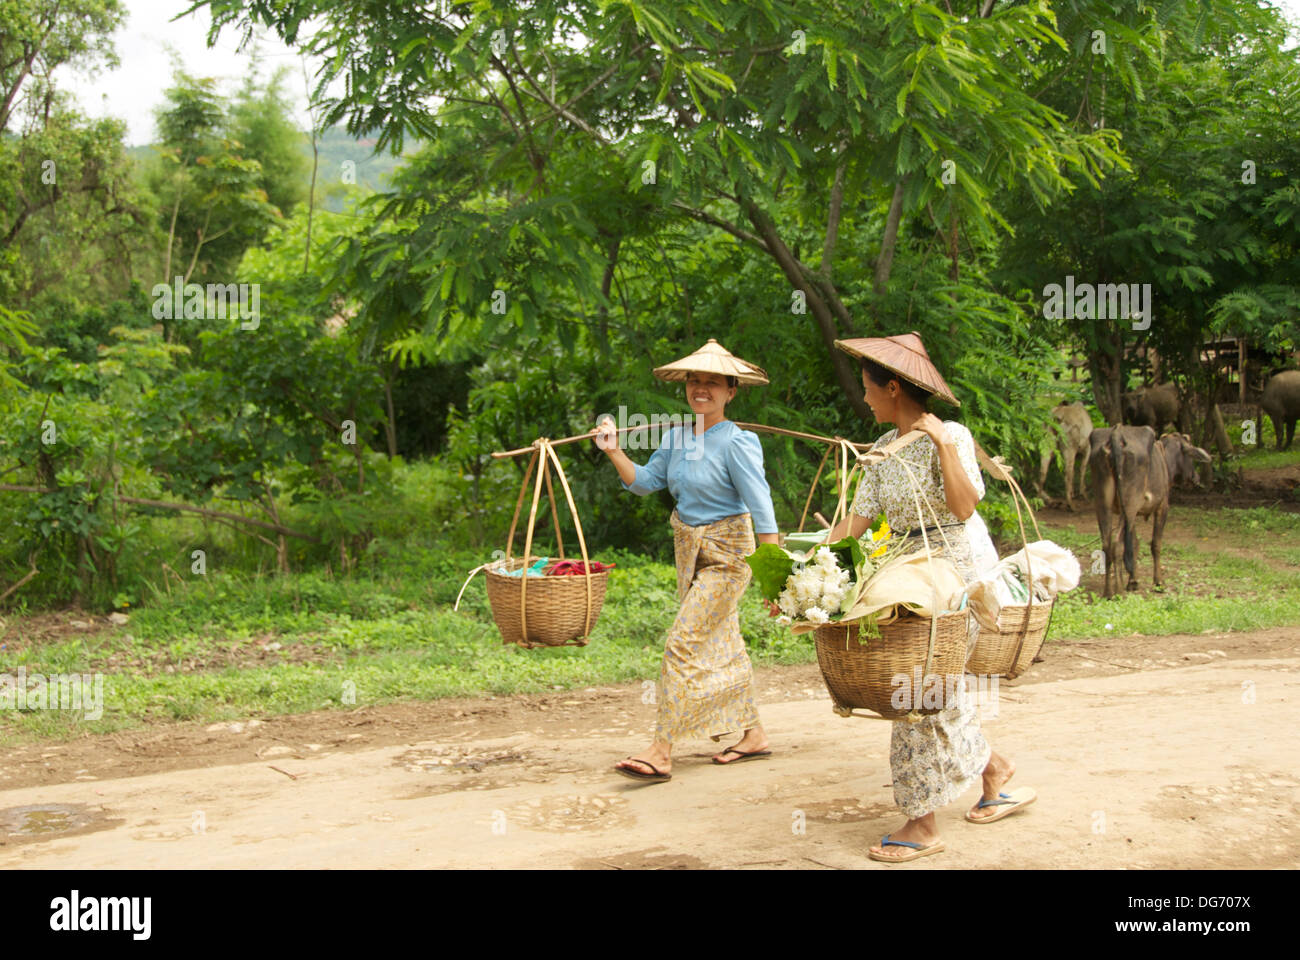 Burmese women carrying baskets on the way to a market Stock Photo